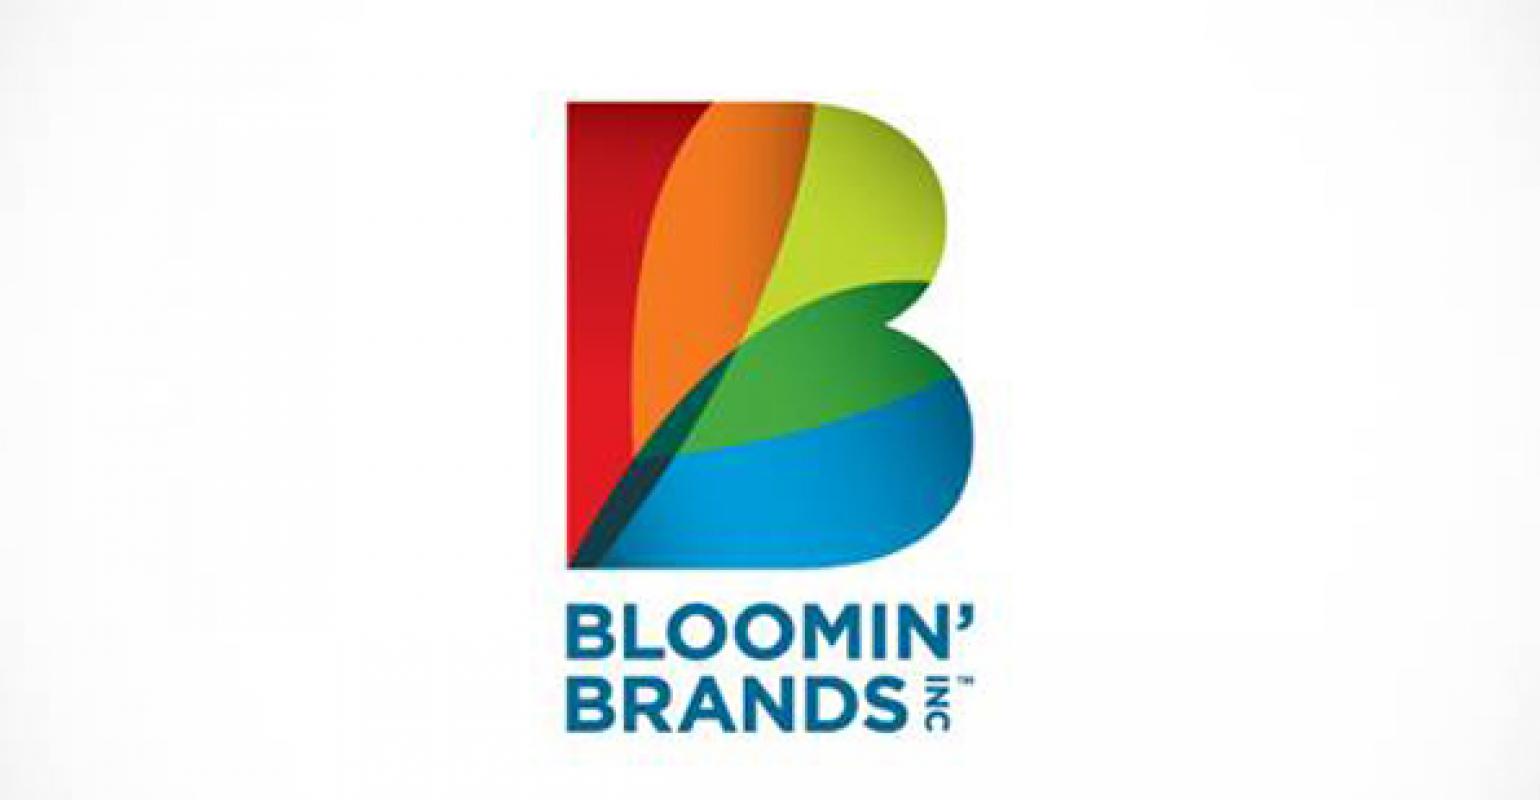 Bloomin' Brands Inc. focuses on customer experience at Outback Steakhouse, restaurants Nation